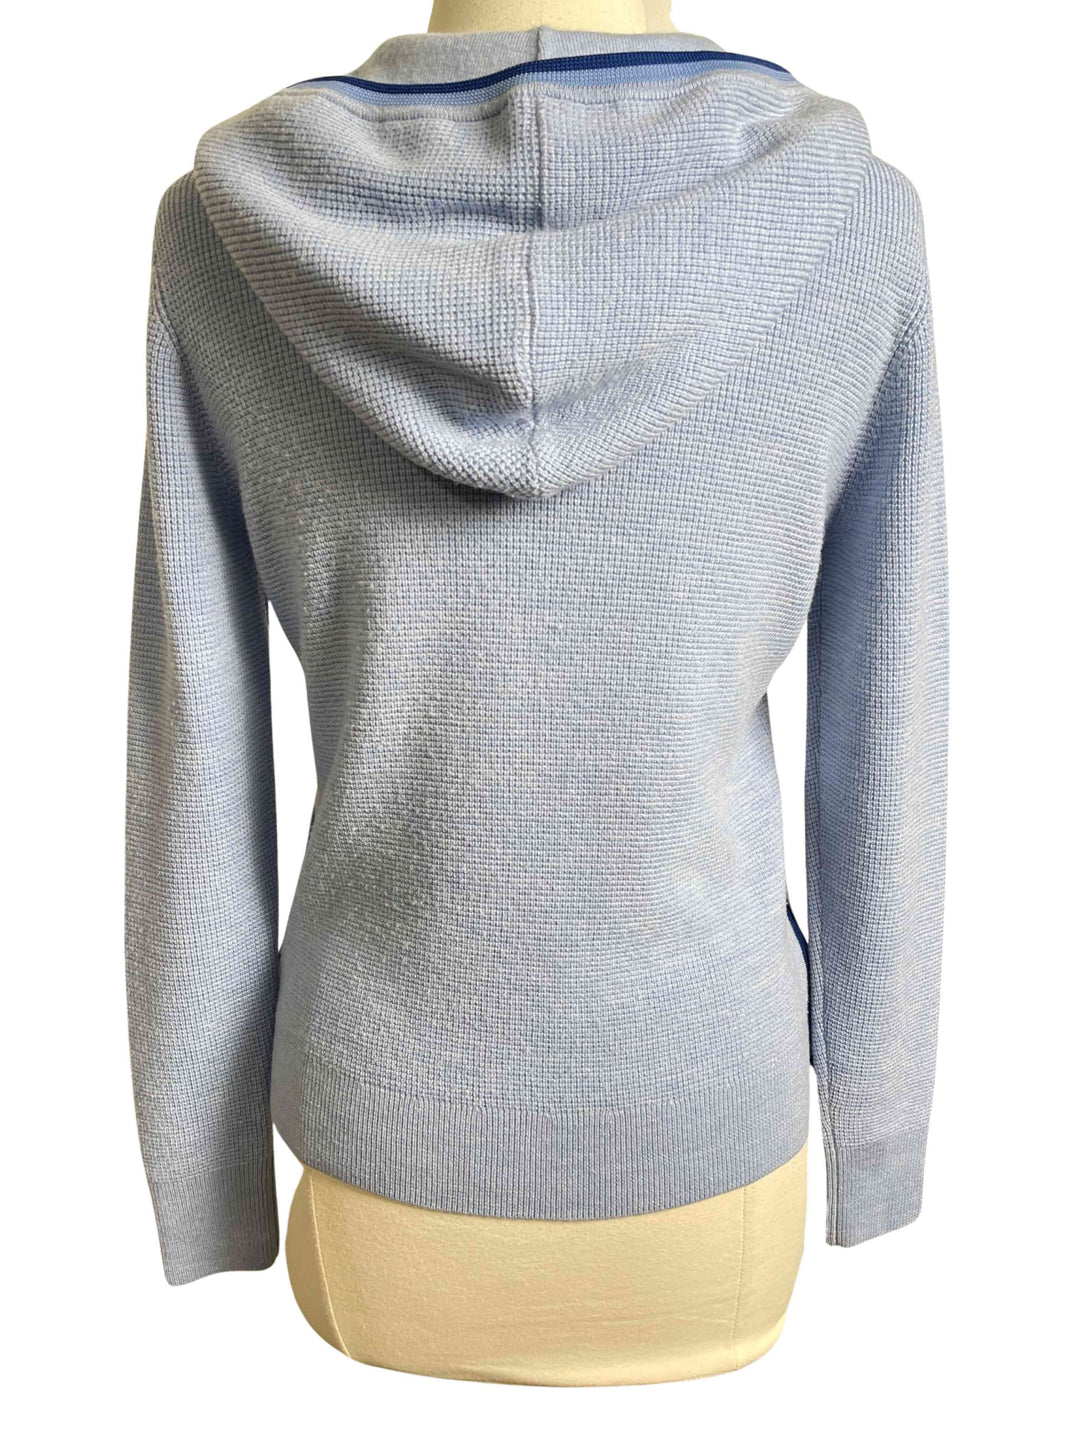 G/FORE Blue Waffle Stitch Hooded Sweater- Small - Skorzie